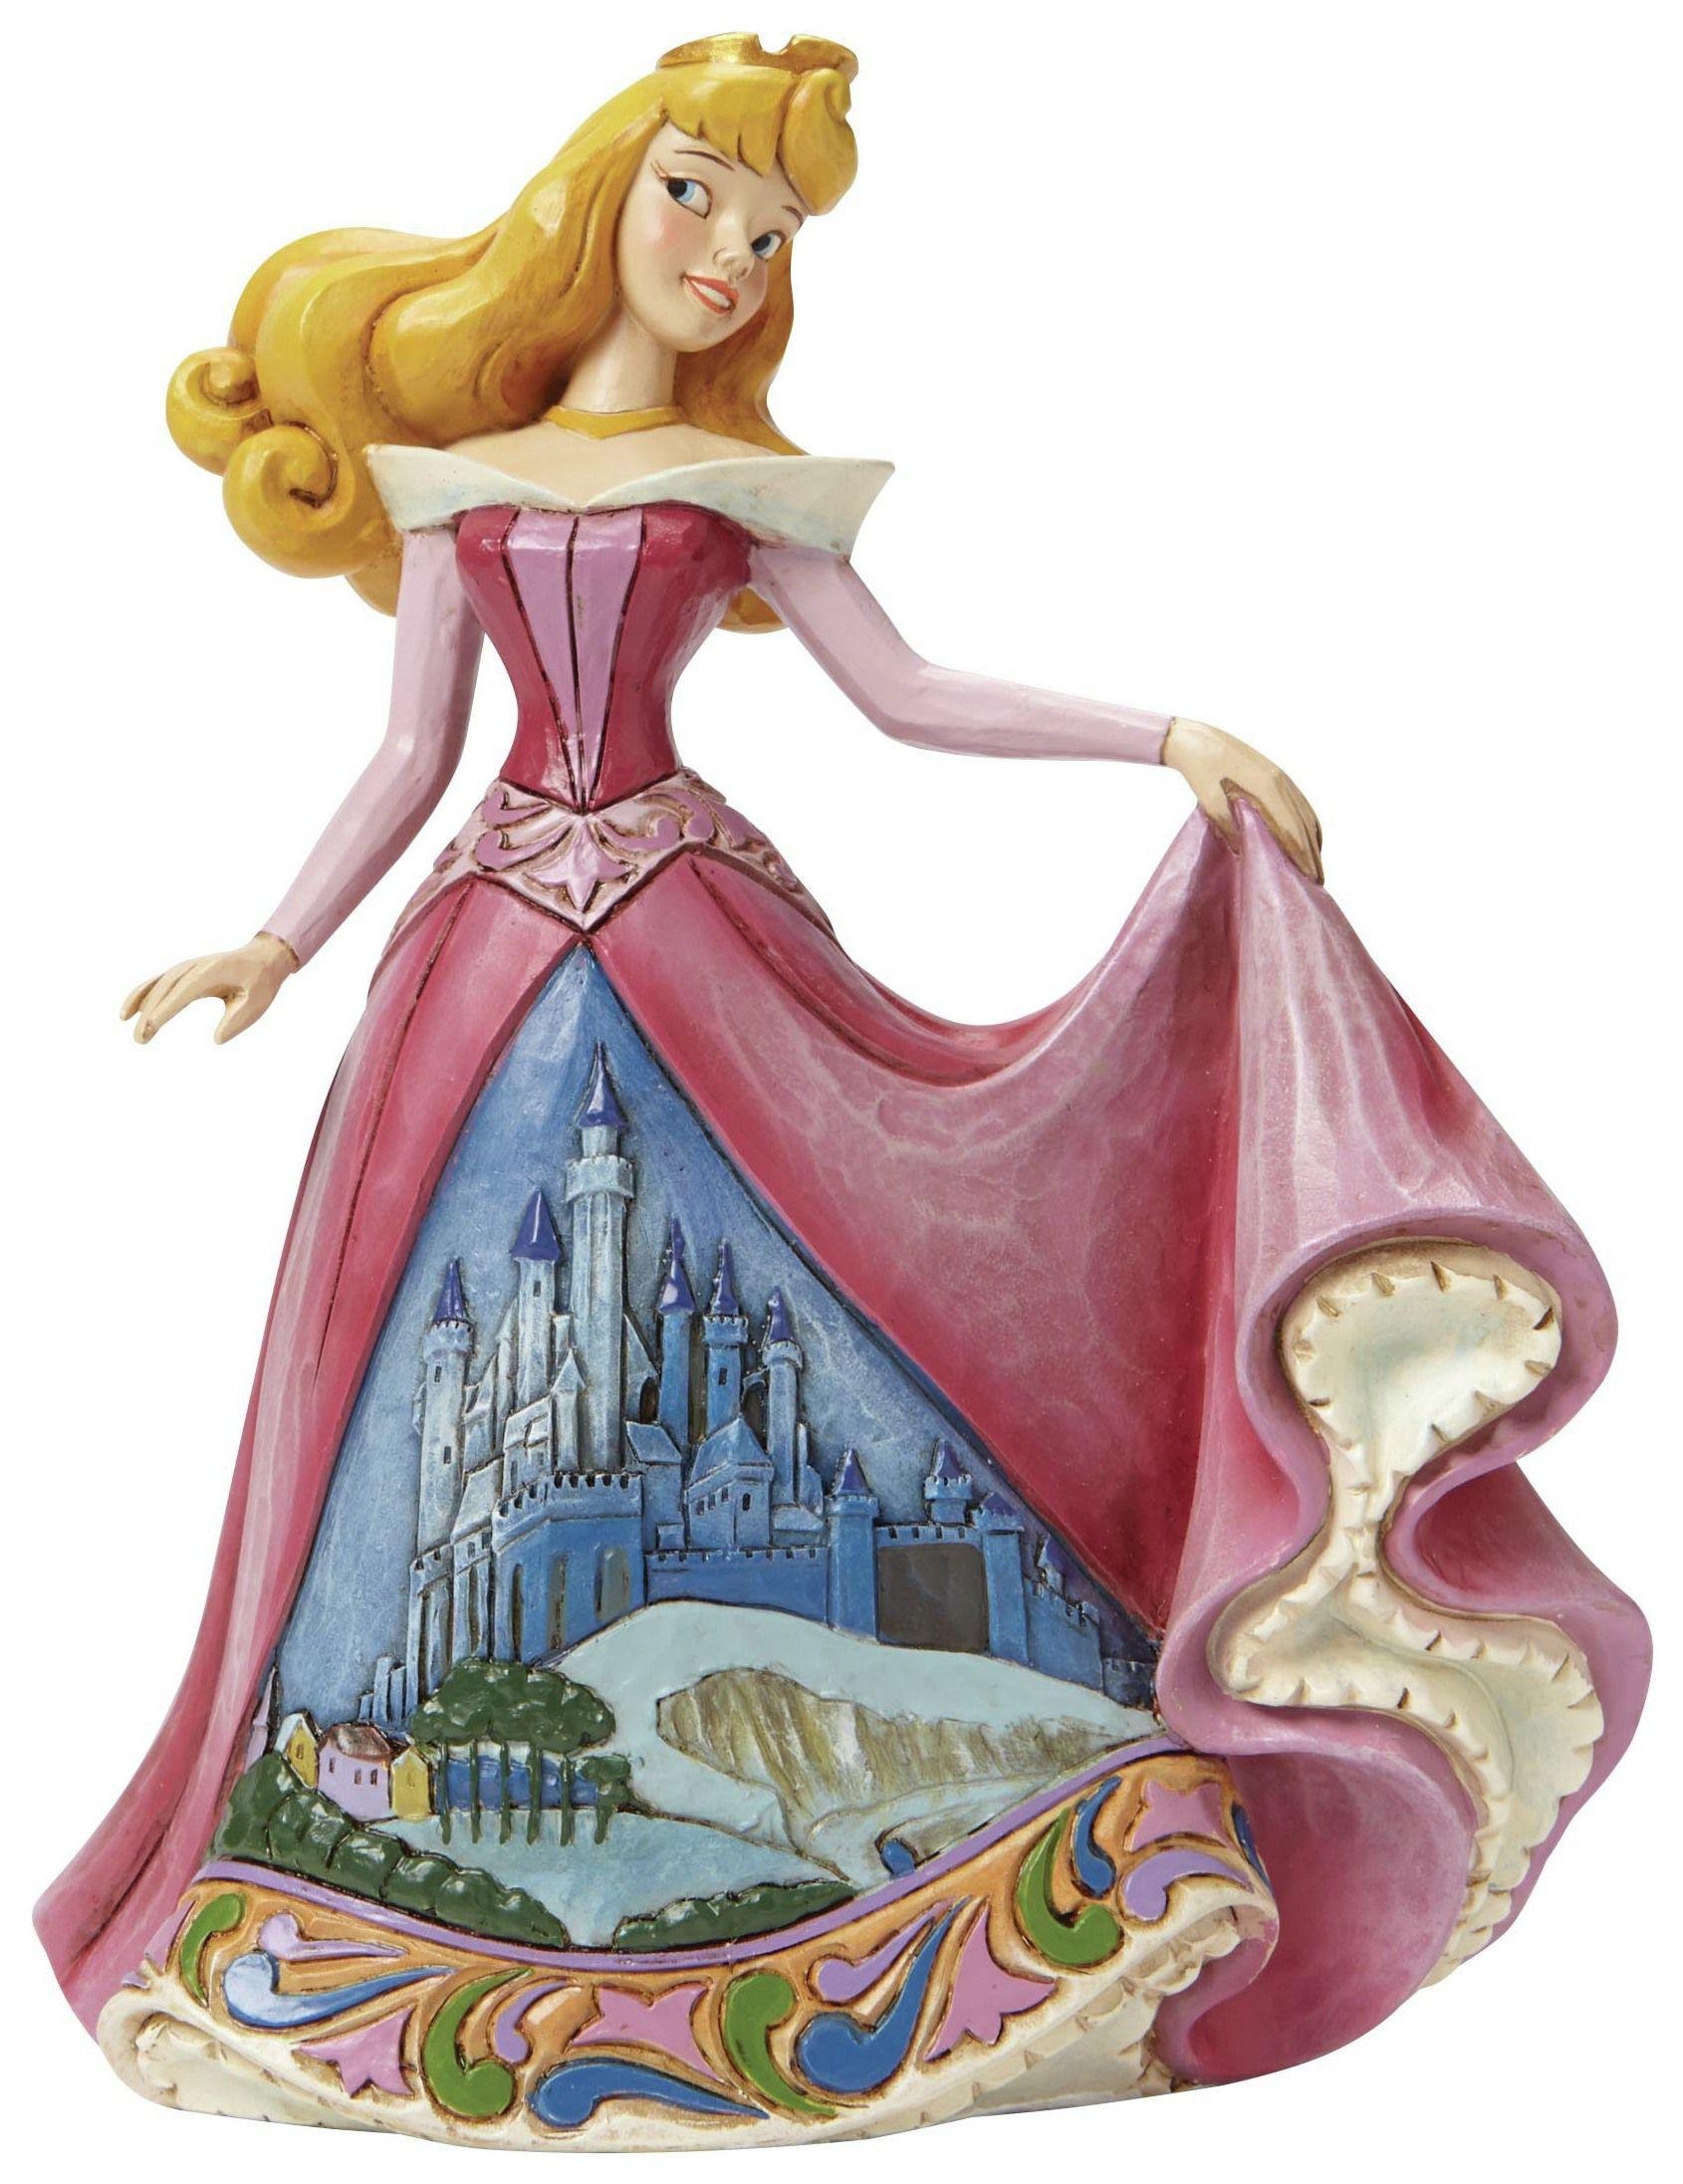 Disney Traditions Once Upon a Kingdom Aurora Ornament